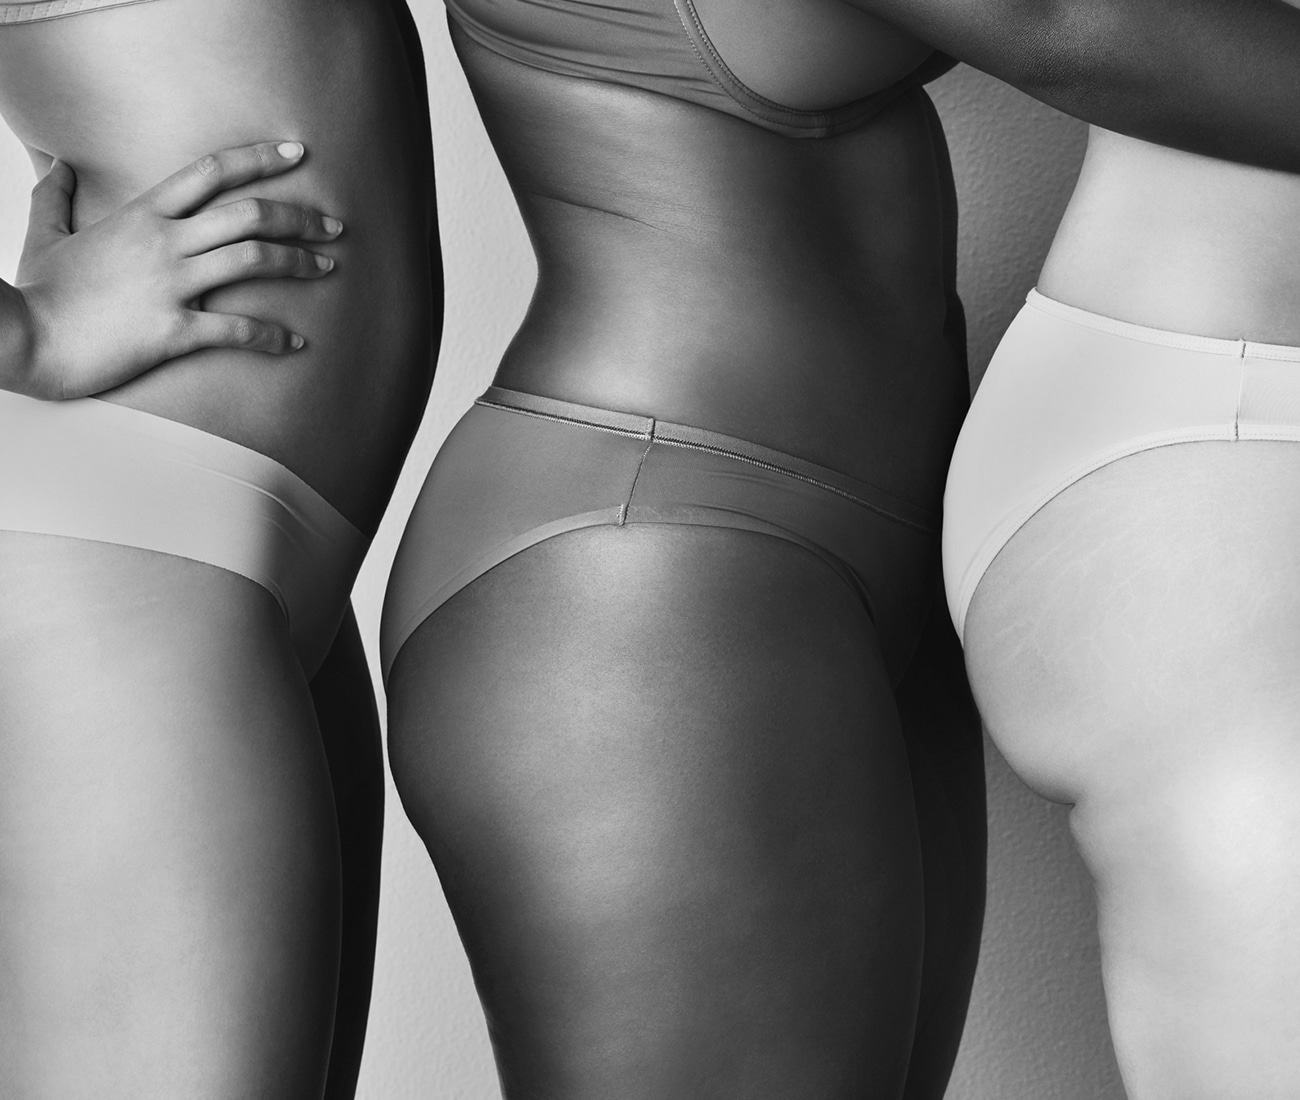 Photo Of Three Women Front To Back, Showing Their Torsos, Black And White Photo